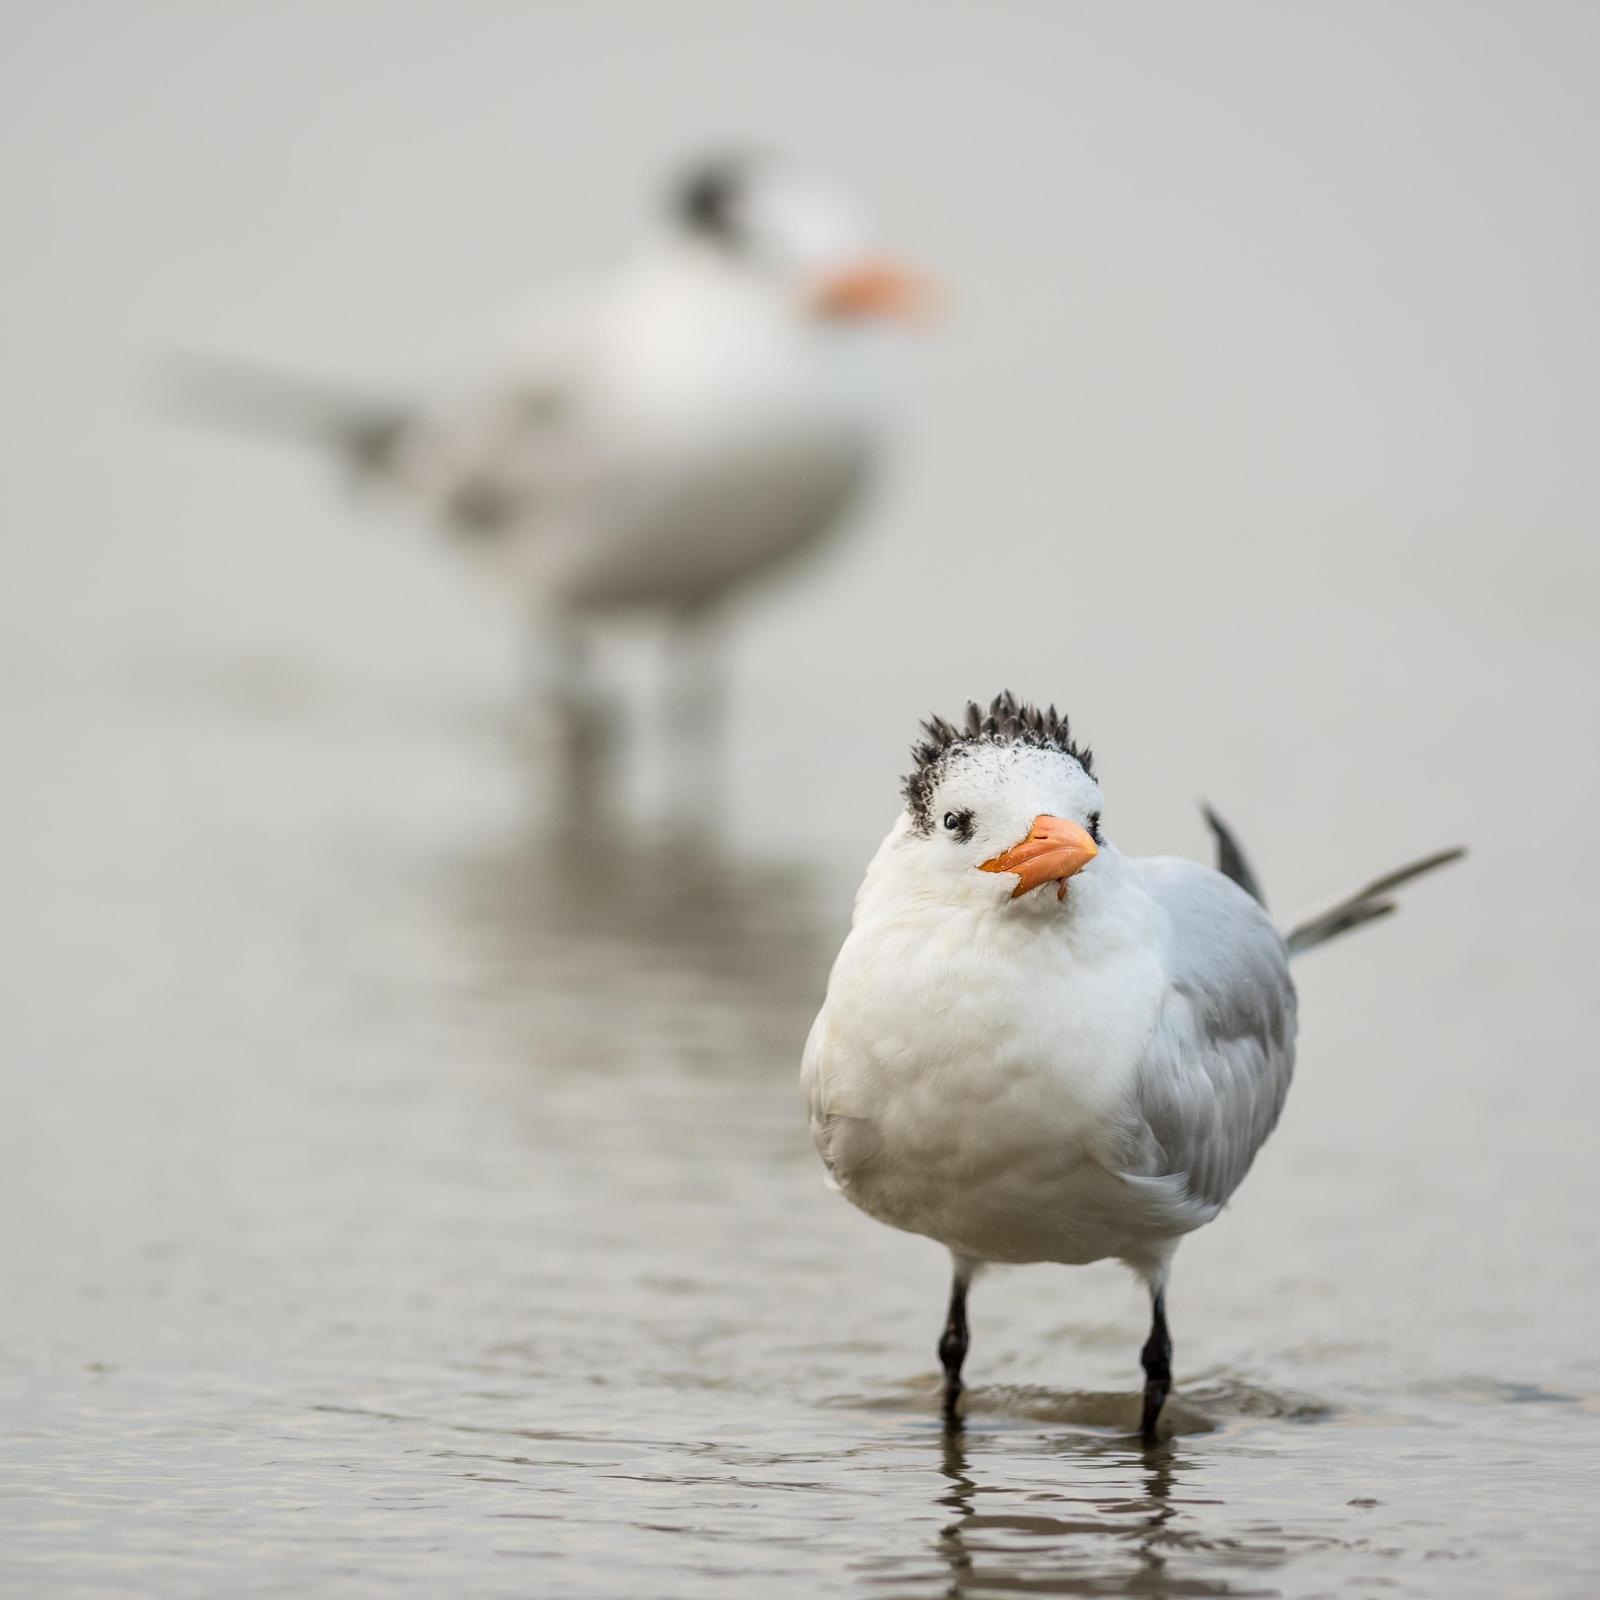 Royal Tern Photo by Jesse Hodges